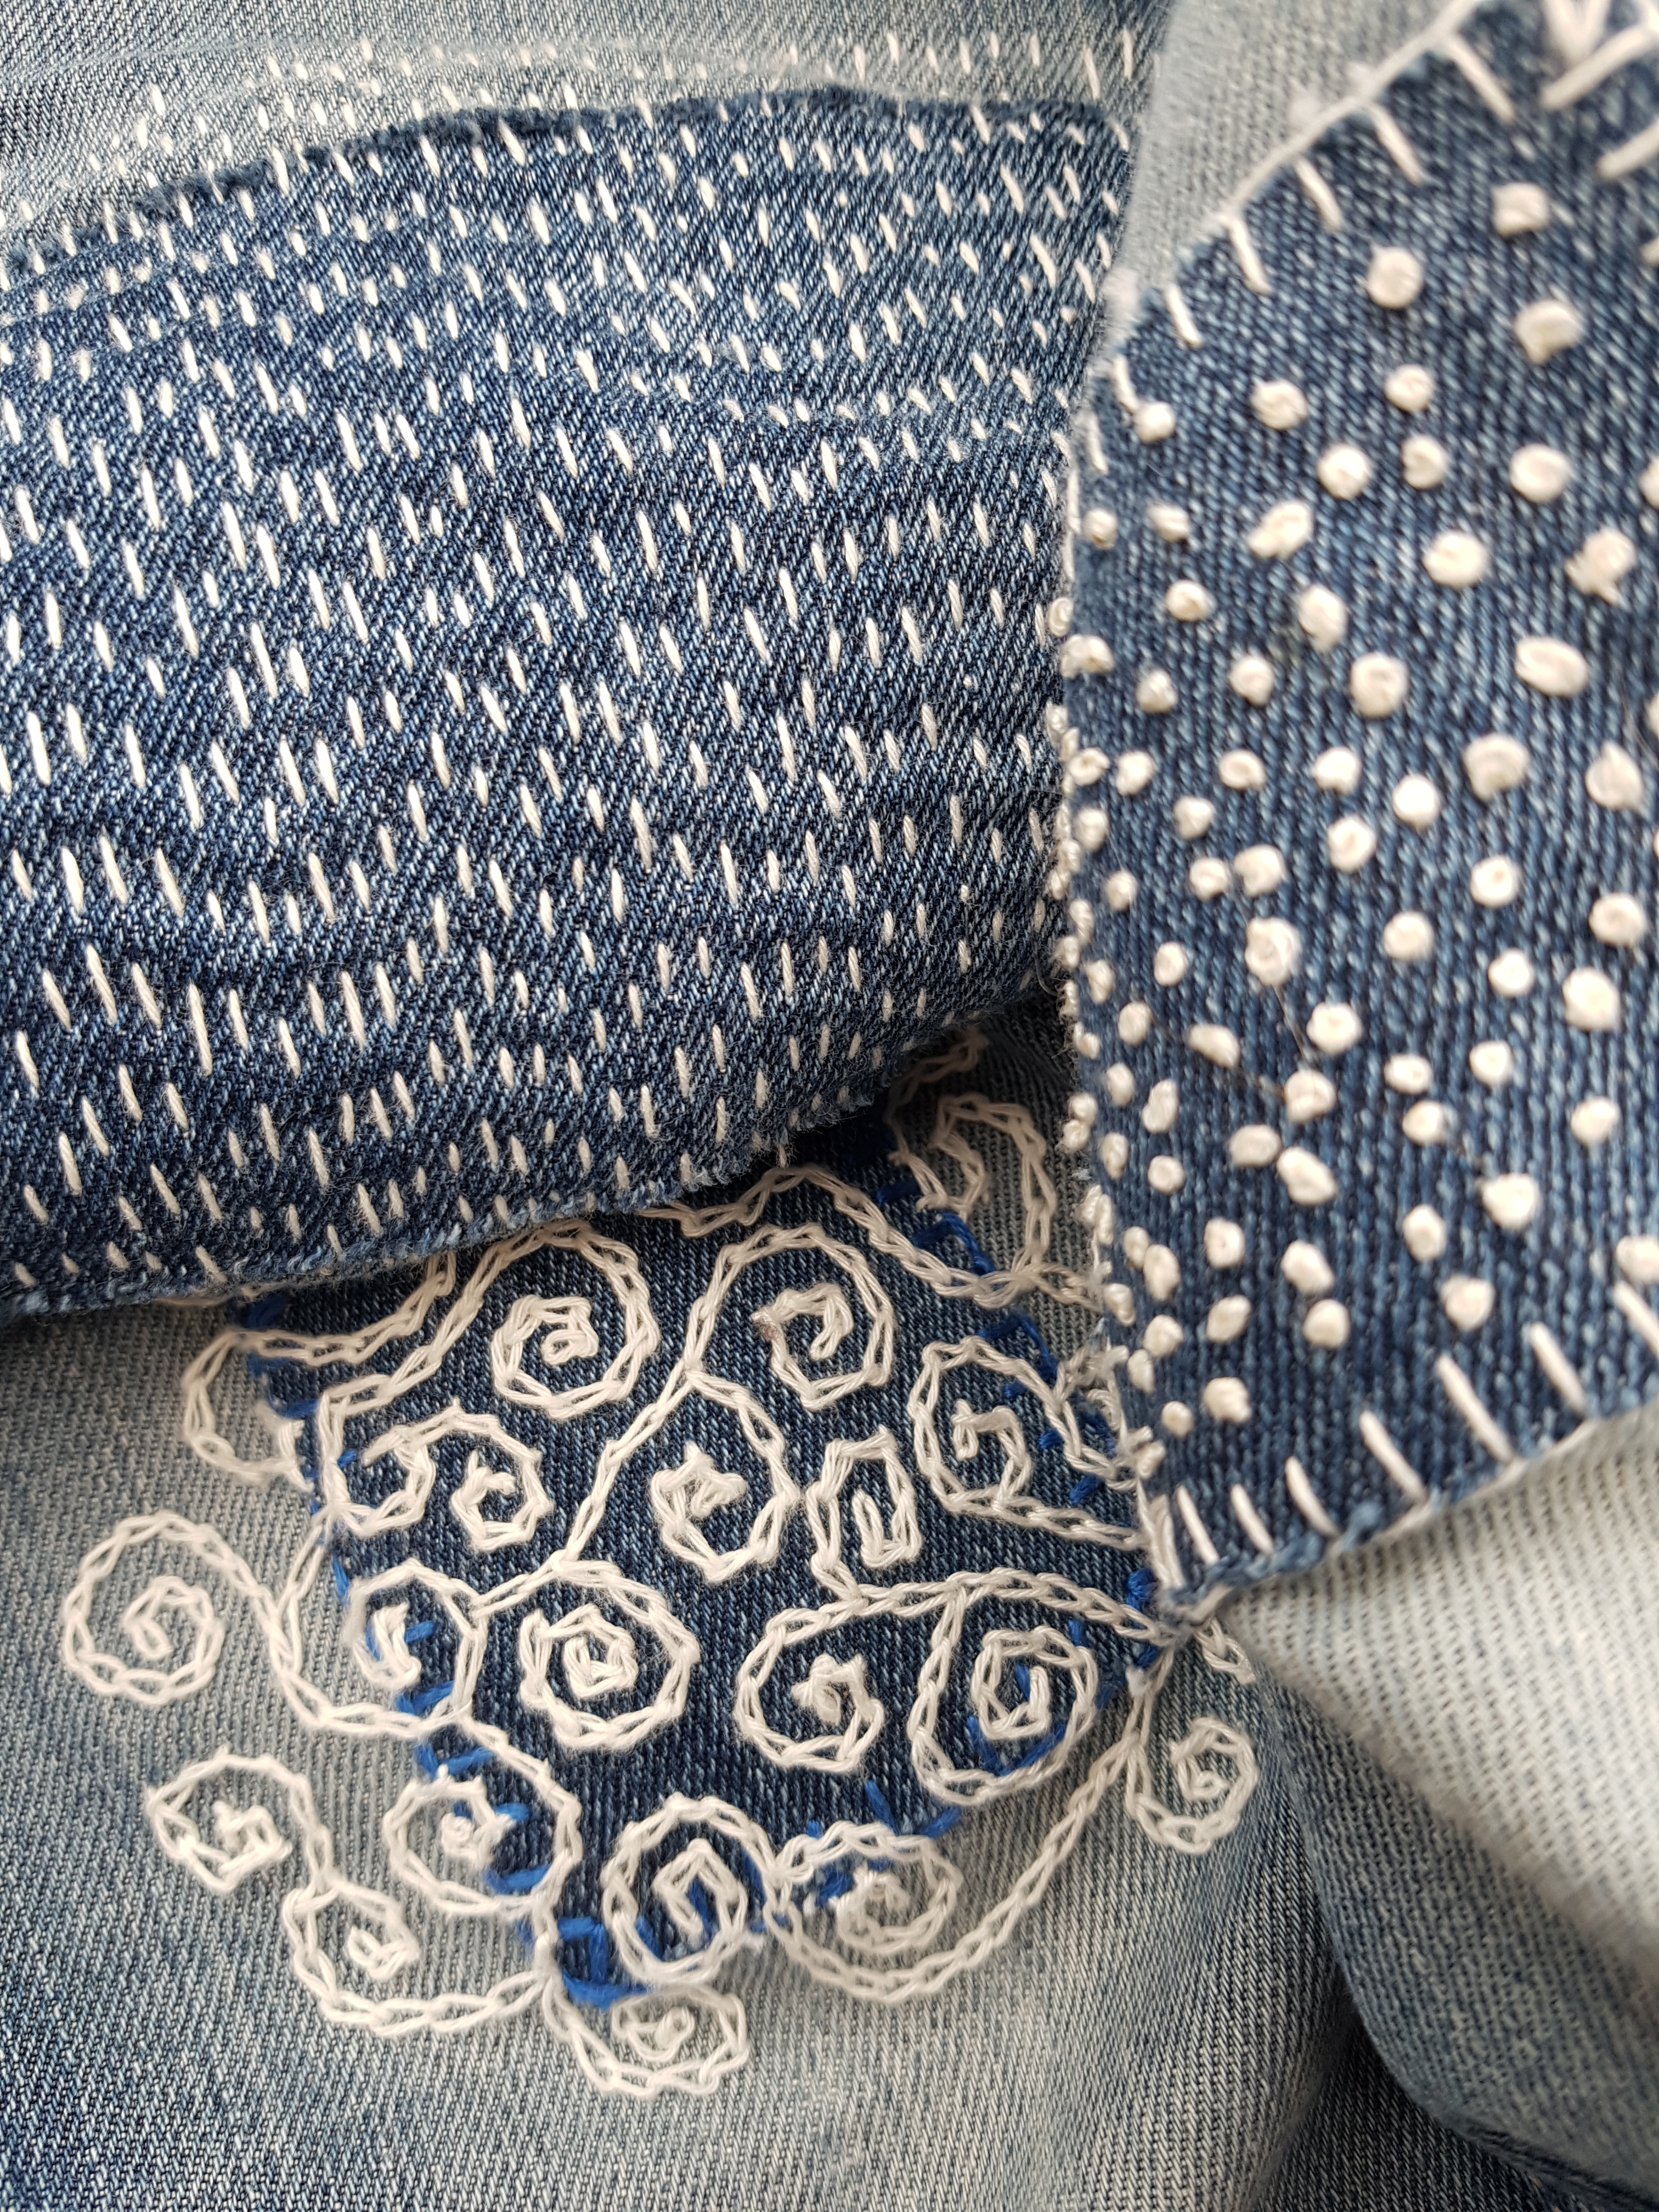 Close-up photo of the knees of a pair of jeans which have had decoratively stitched (boro, French knots, chain stitch) denim patches applied to not just fix but enhance the holes